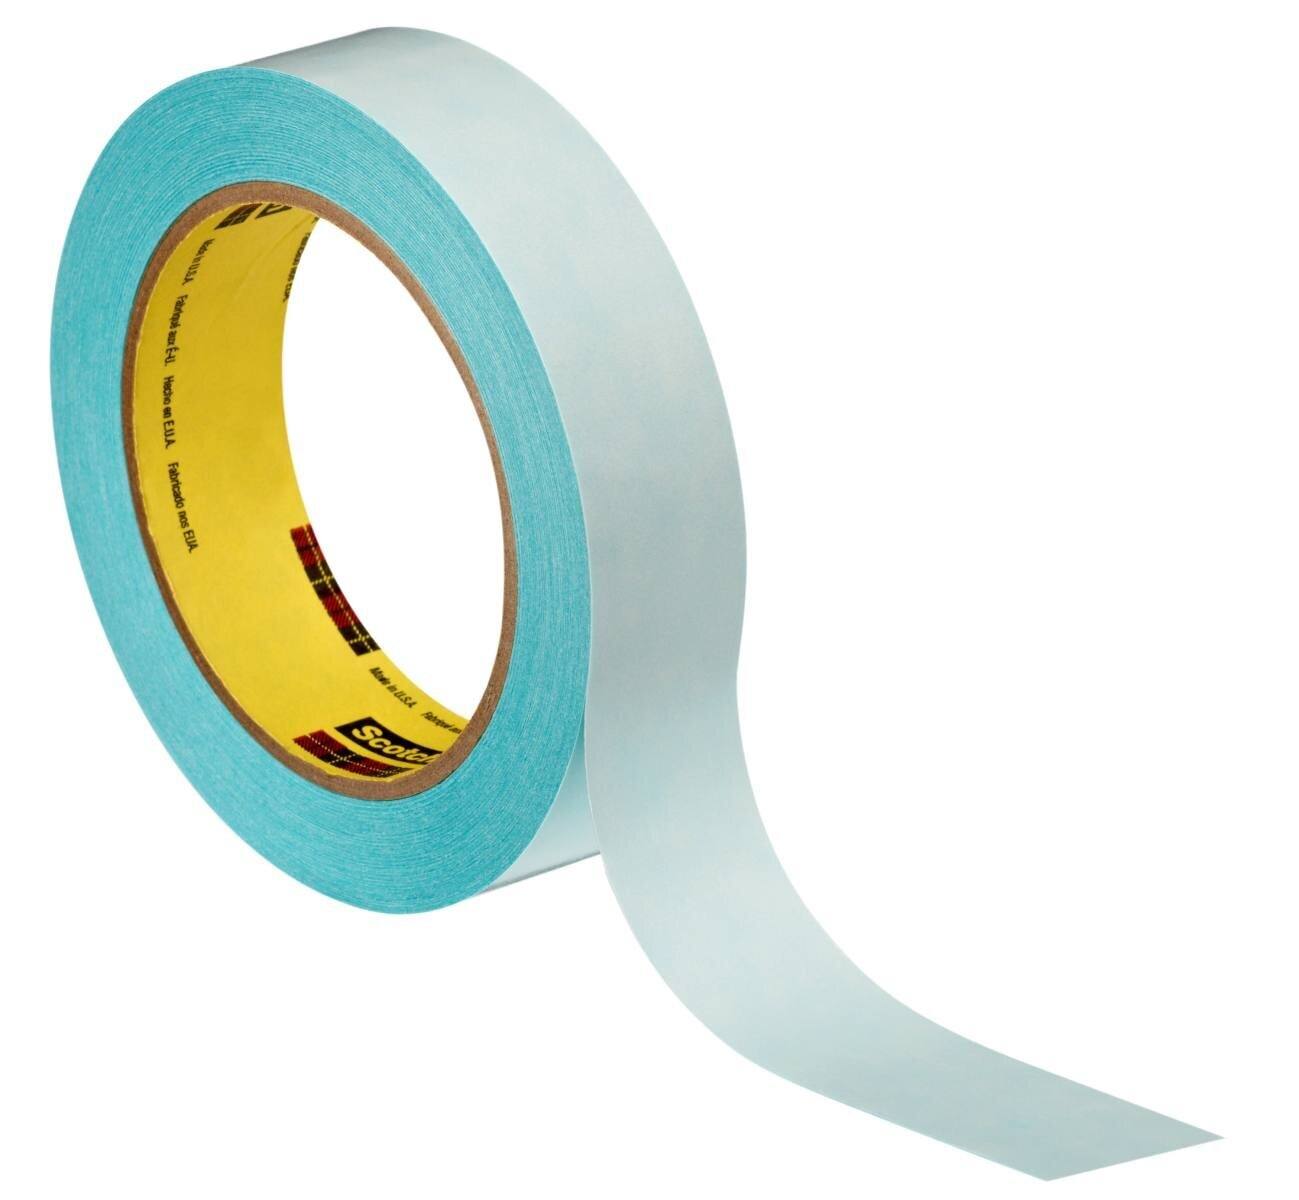 3M double-sided adhesive tape 906W, white, 50 mm x 50 m, 0.08 mm